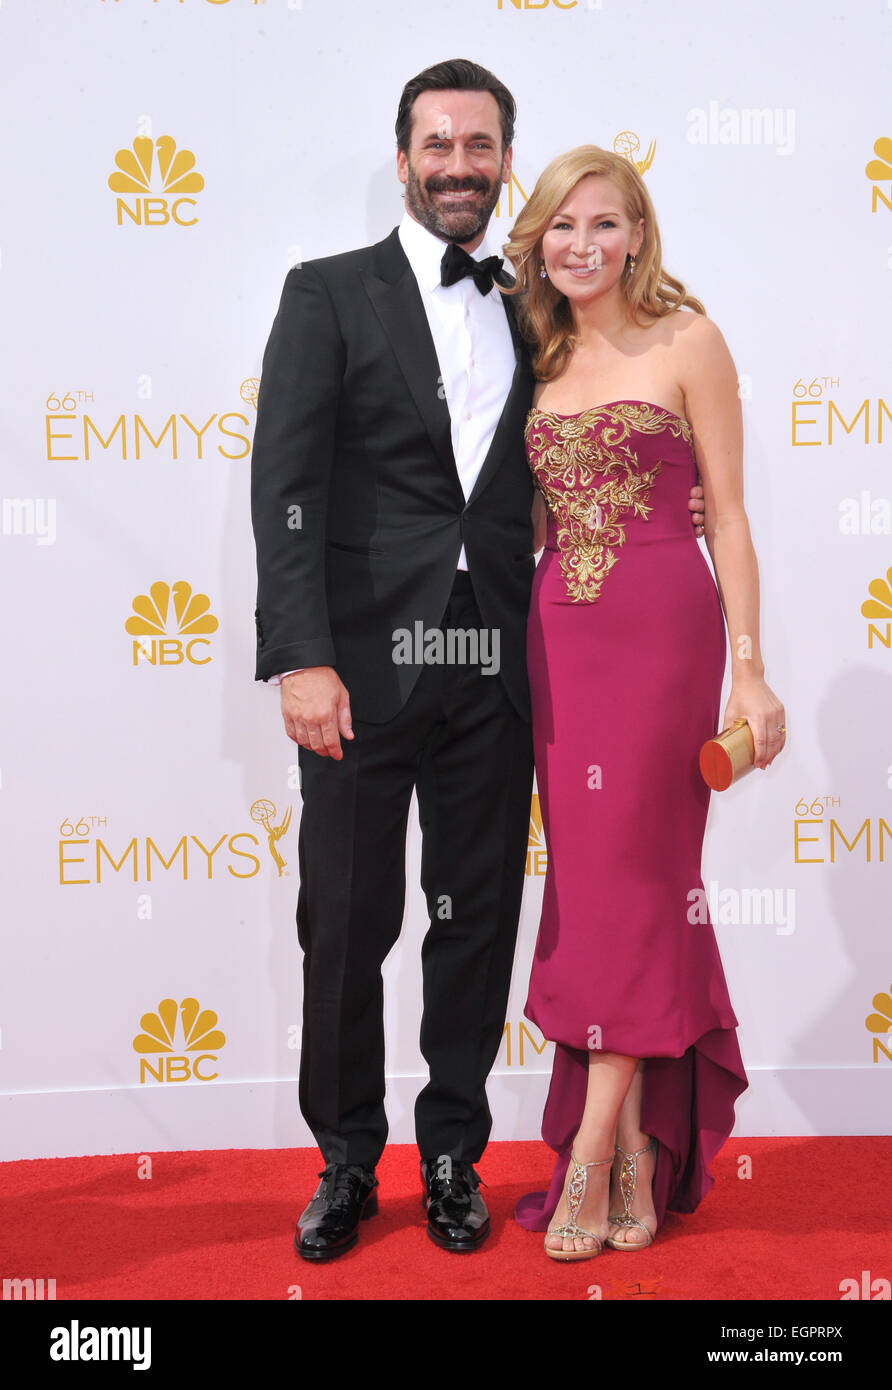 LOS ANGELES, CA - AUGUST 25, 2014: Jon Hamm & Jennifer Westfeldt at the 66th Primetime Emmy Awards at the Nokia Theatre L.A. Live downtown Los Angeles. Stock Photo